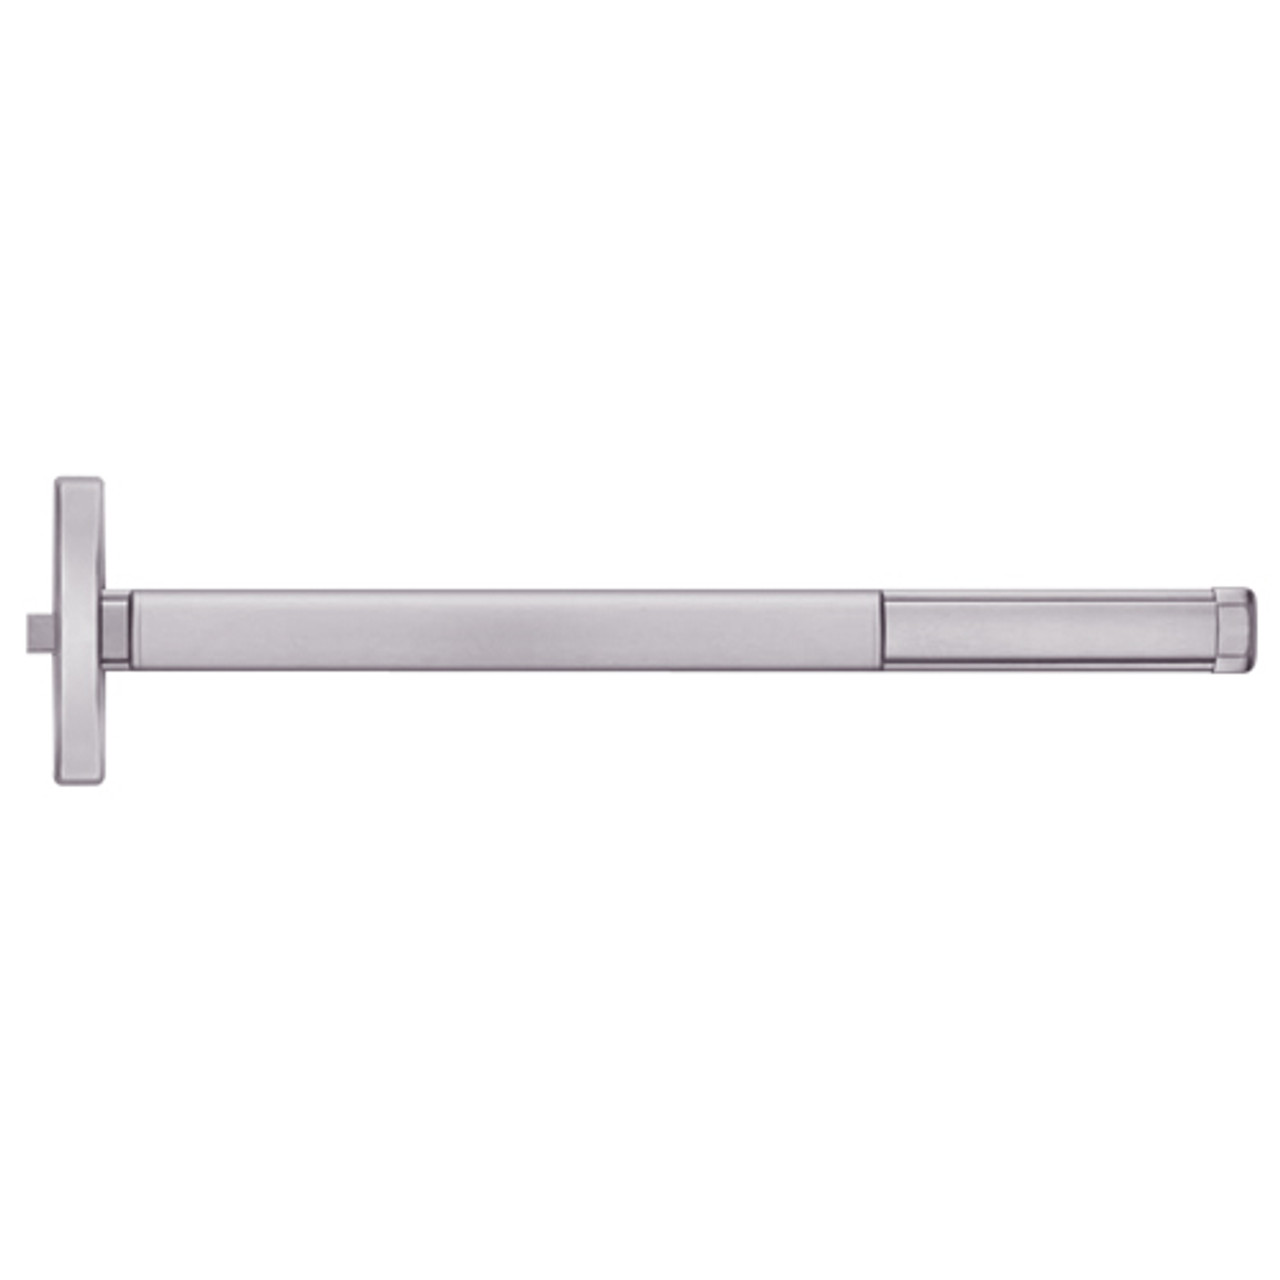 MLRFL2414-630-48 PHI 2400 Series Fire Rated Apex Rim Exit Device with Motorized Latch Retraction Prepped for Lever Always Active in Satin Stainless Steel Finish